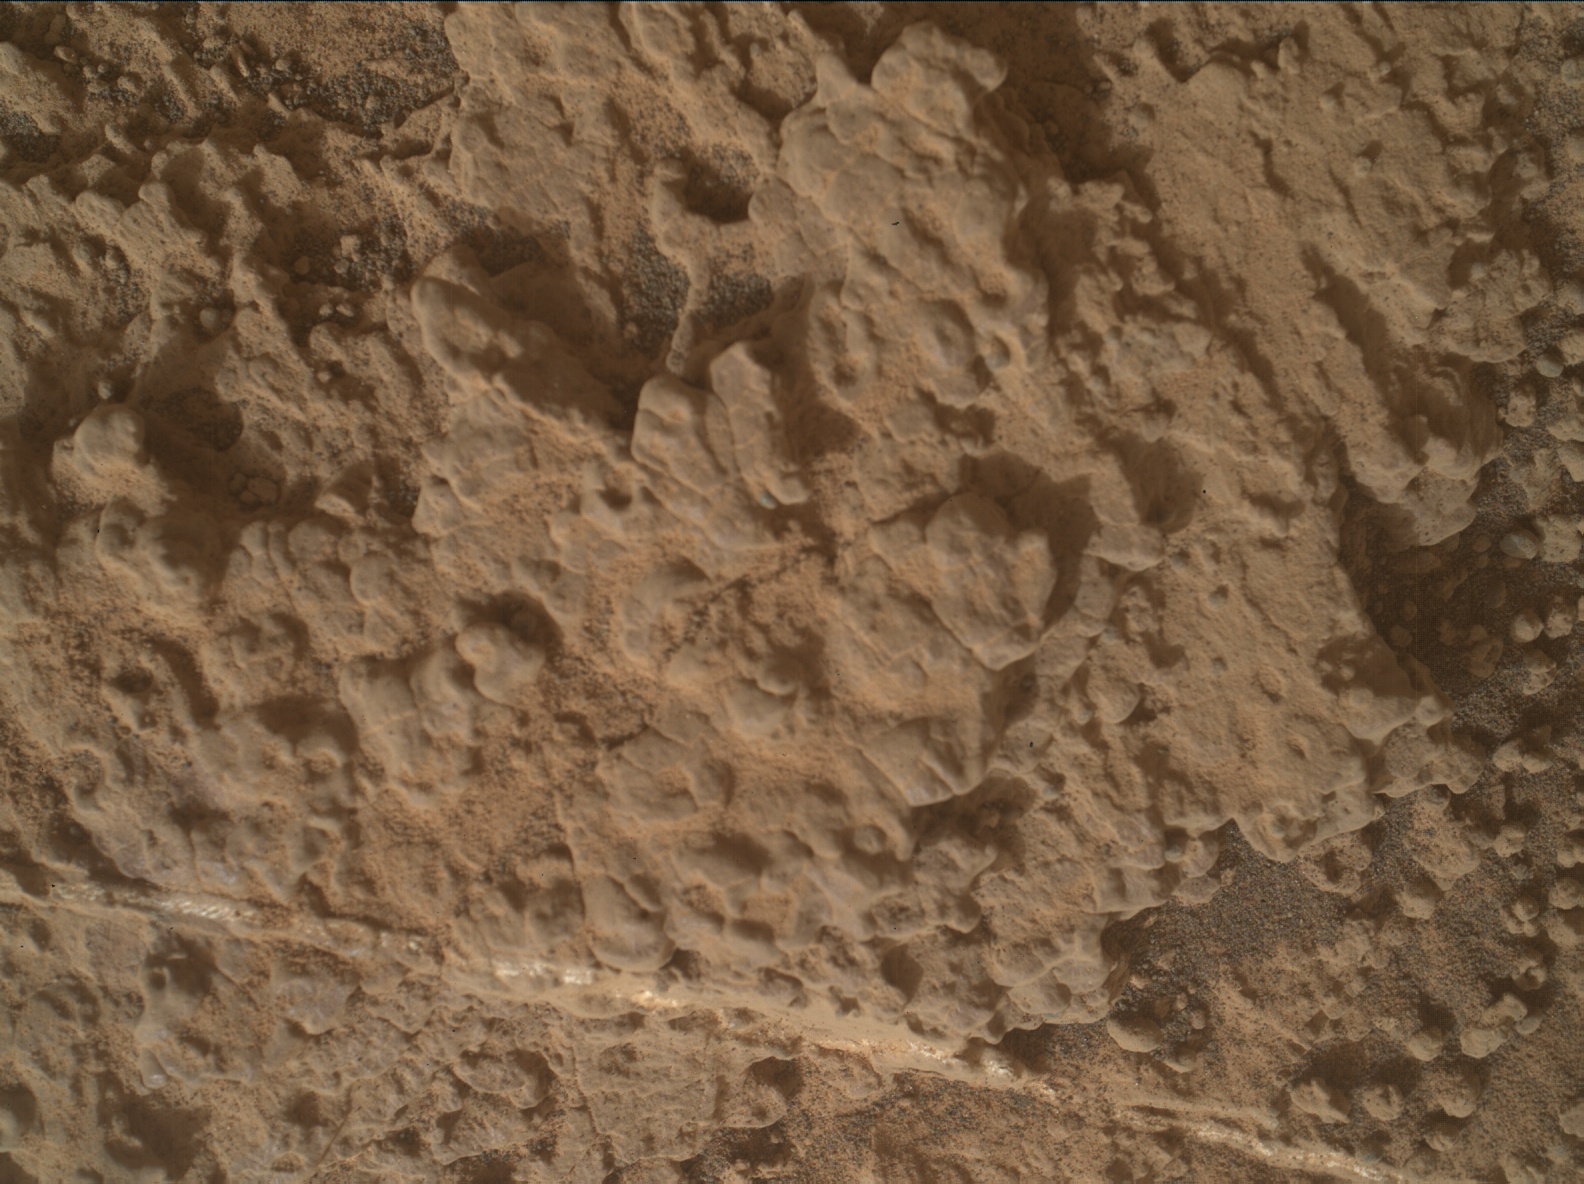 Nasa's Mars rover Curiosity acquired this image using its Mars Hand Lens Imager (MAHLI) on Sol 3508